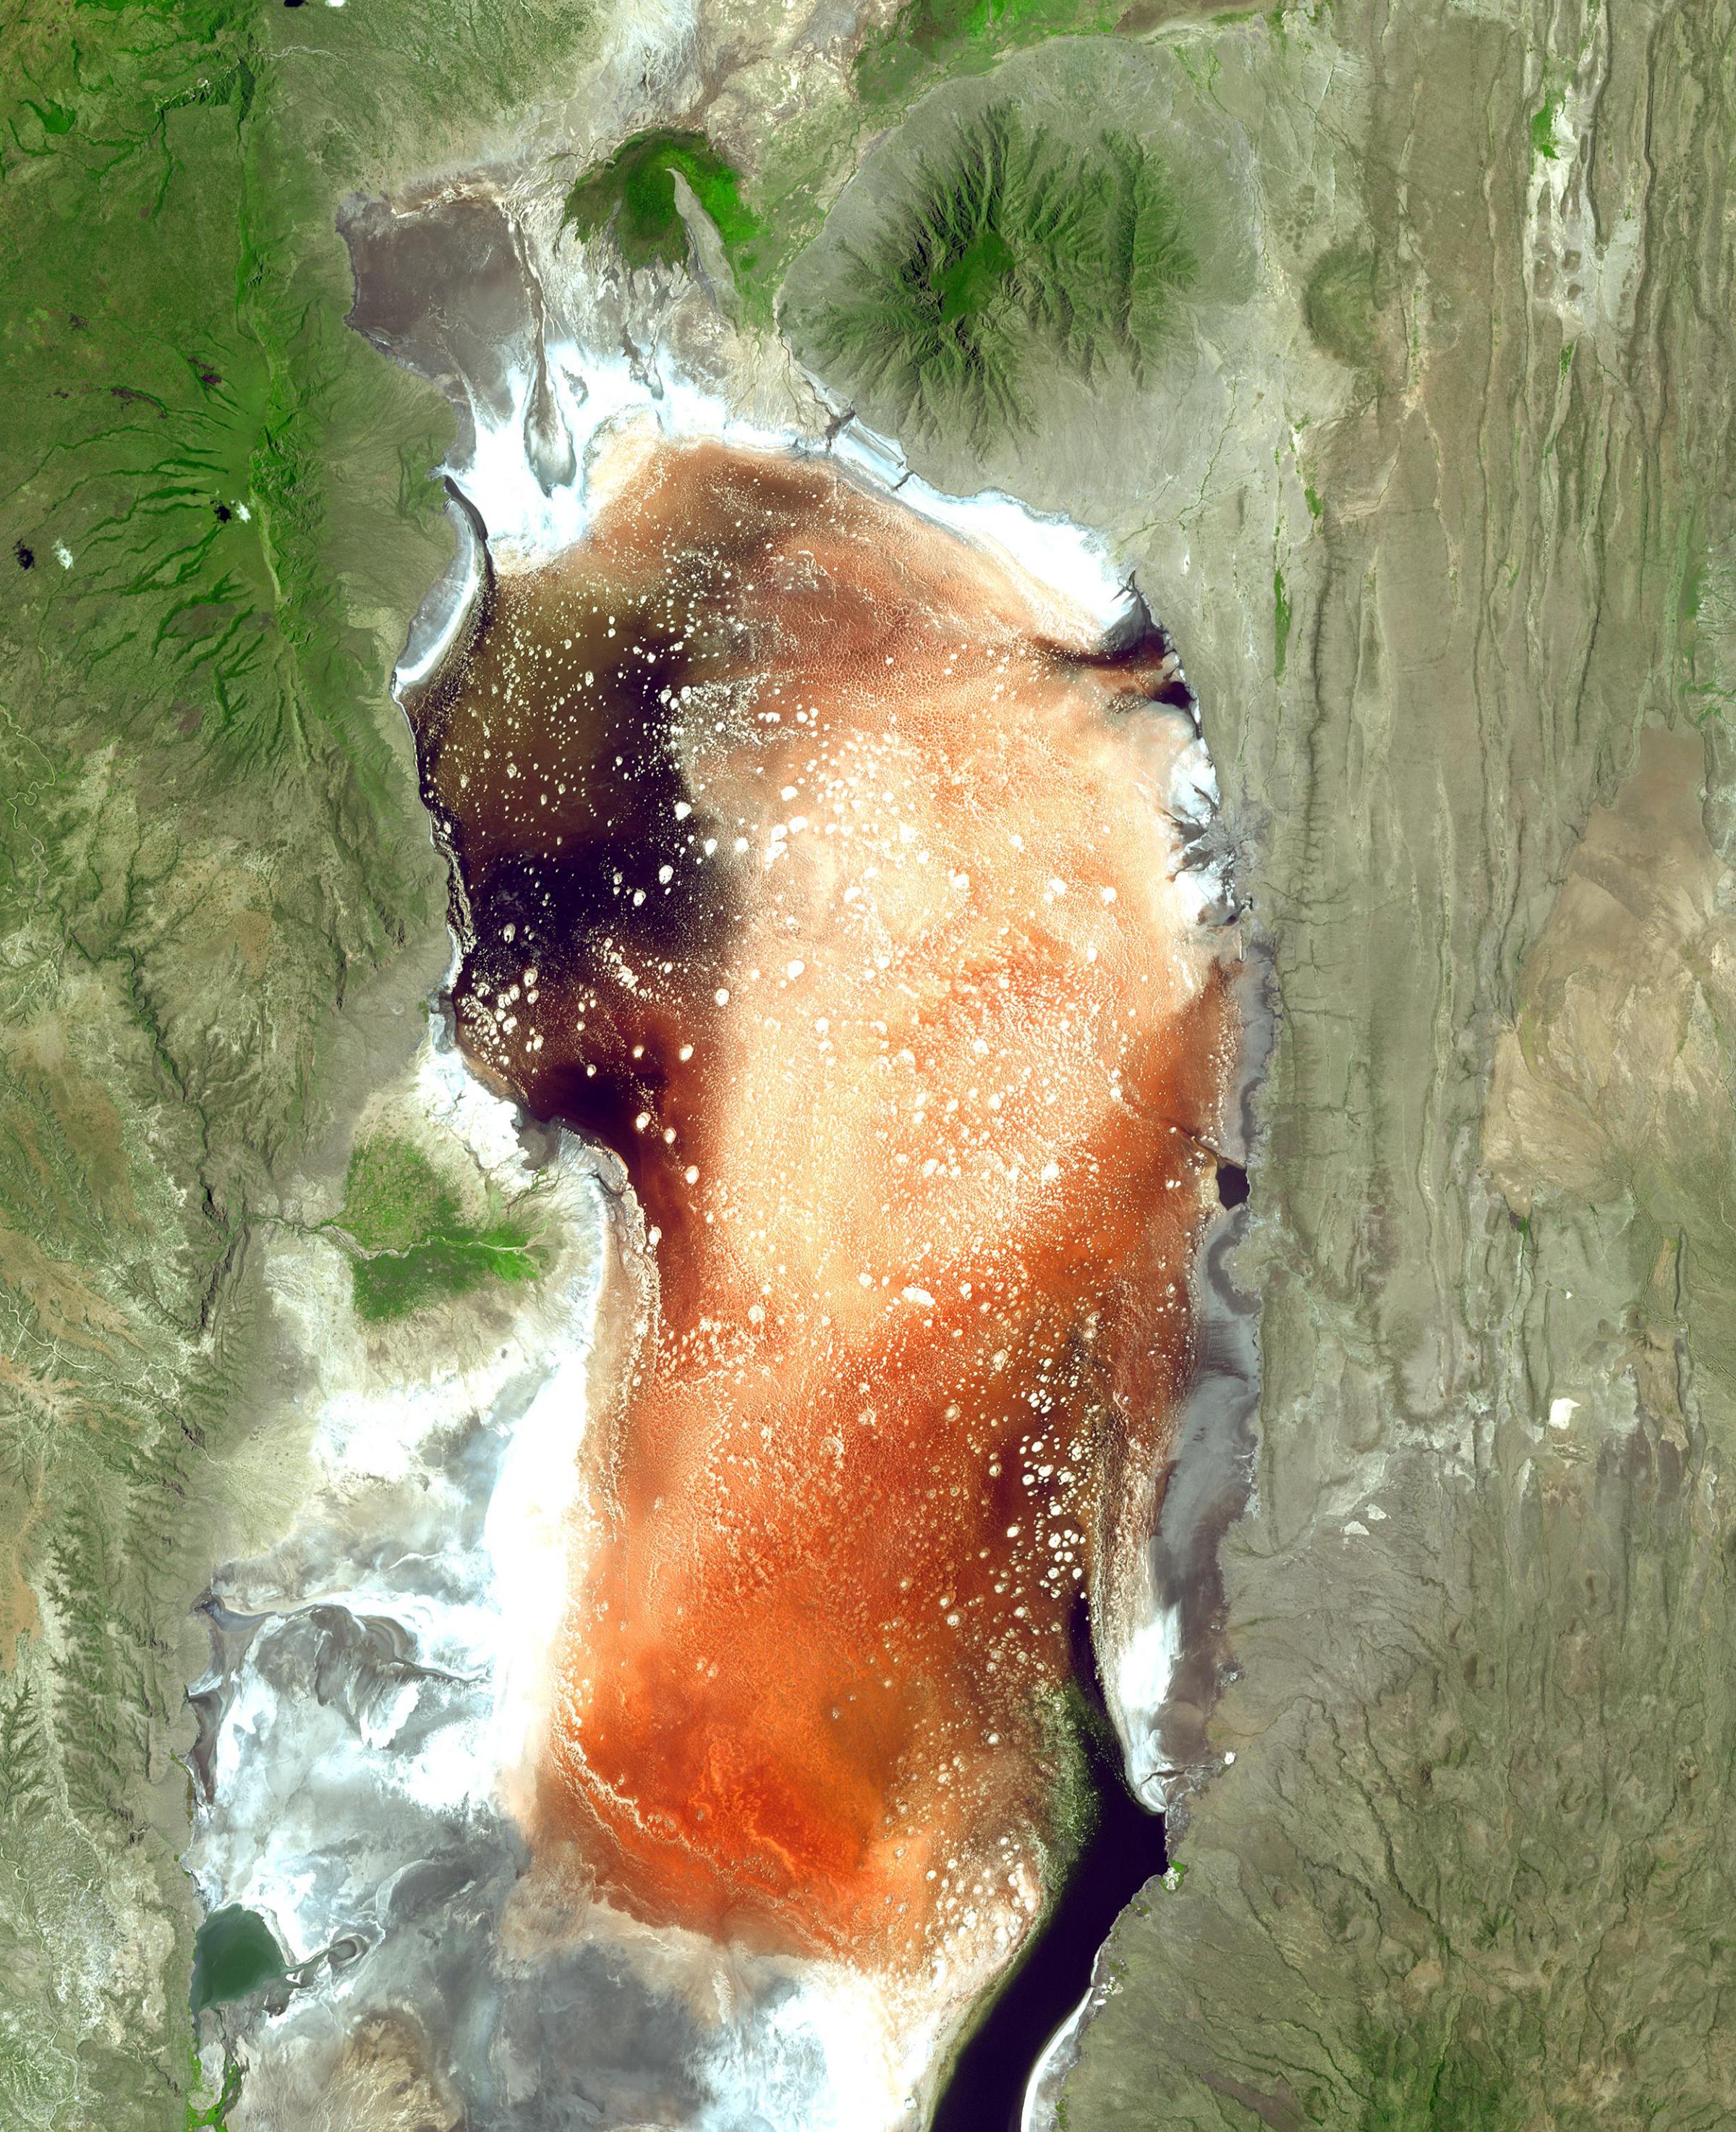 The alkali salt crust on the surface of Lake Natron in Tanzania is often colored red or pink by the salt-loving microorganisms that live there. This image was acquired on March 8, 2003.